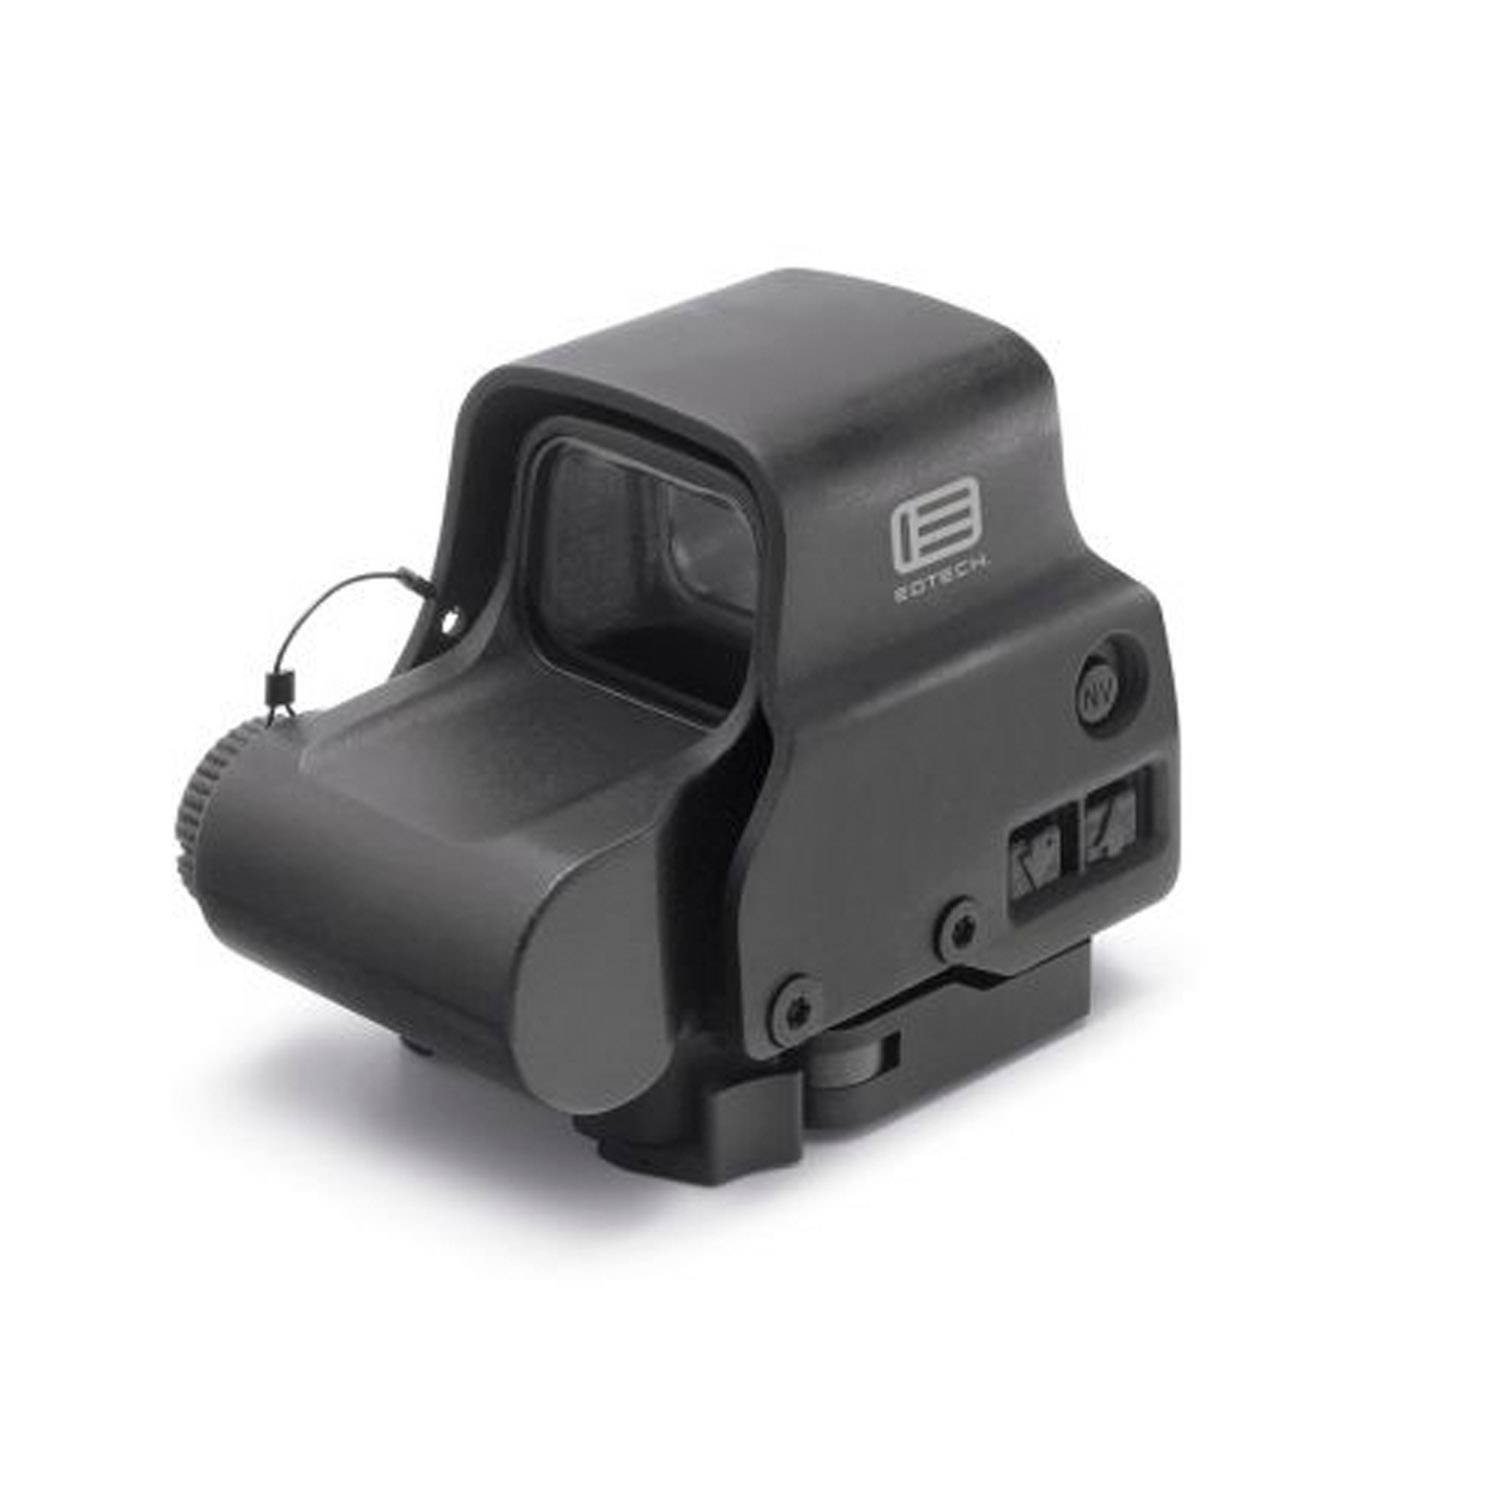 EOTECH EXPS3 HOLOGRAPHIC SIGHT